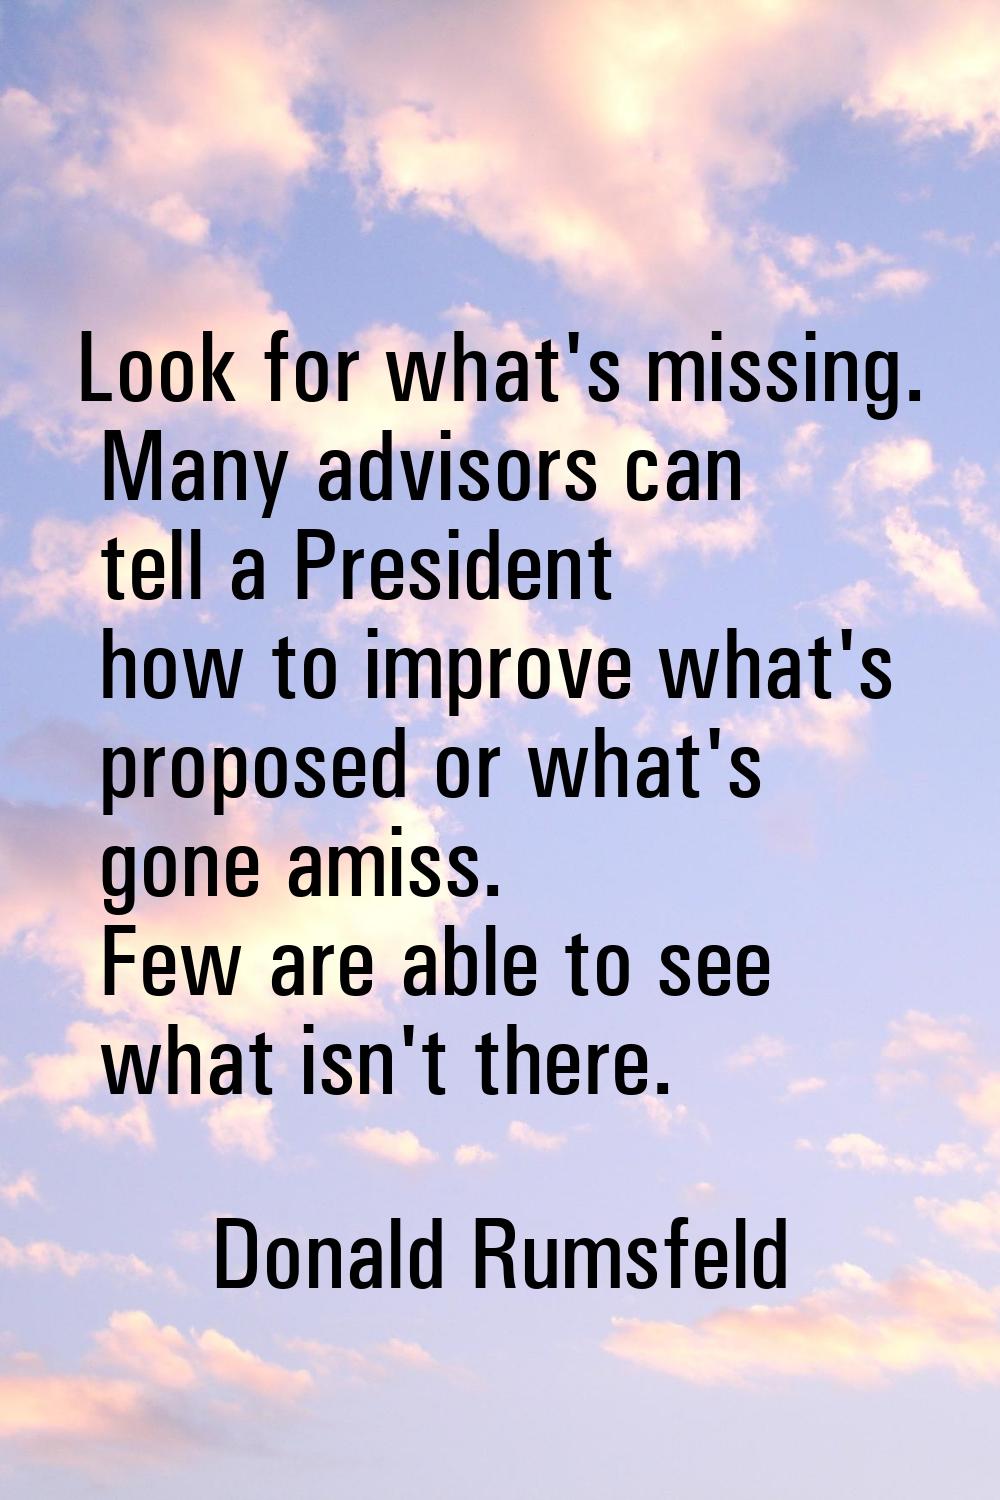 Look for what's missing. Many advisors can tell a President how to improve what's proposed or what'